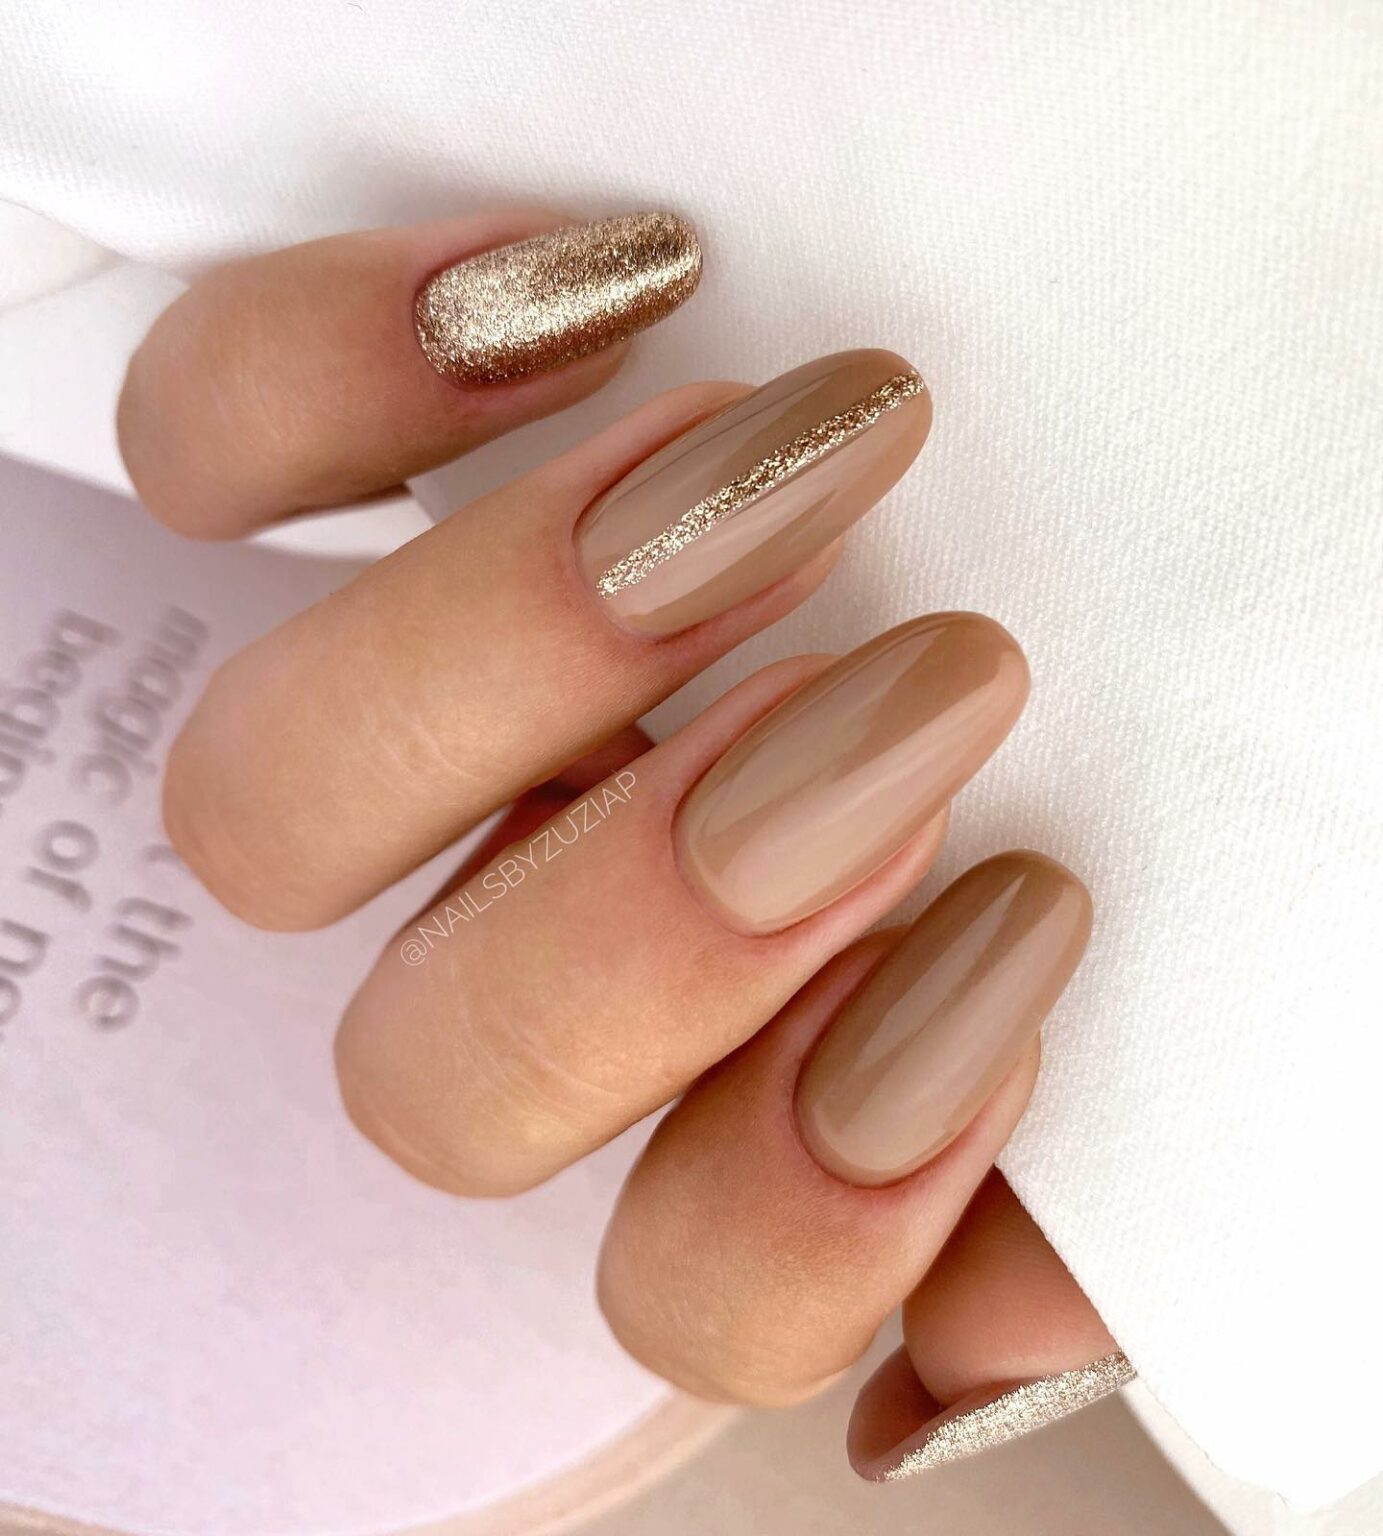 Nails With Gold Glitter